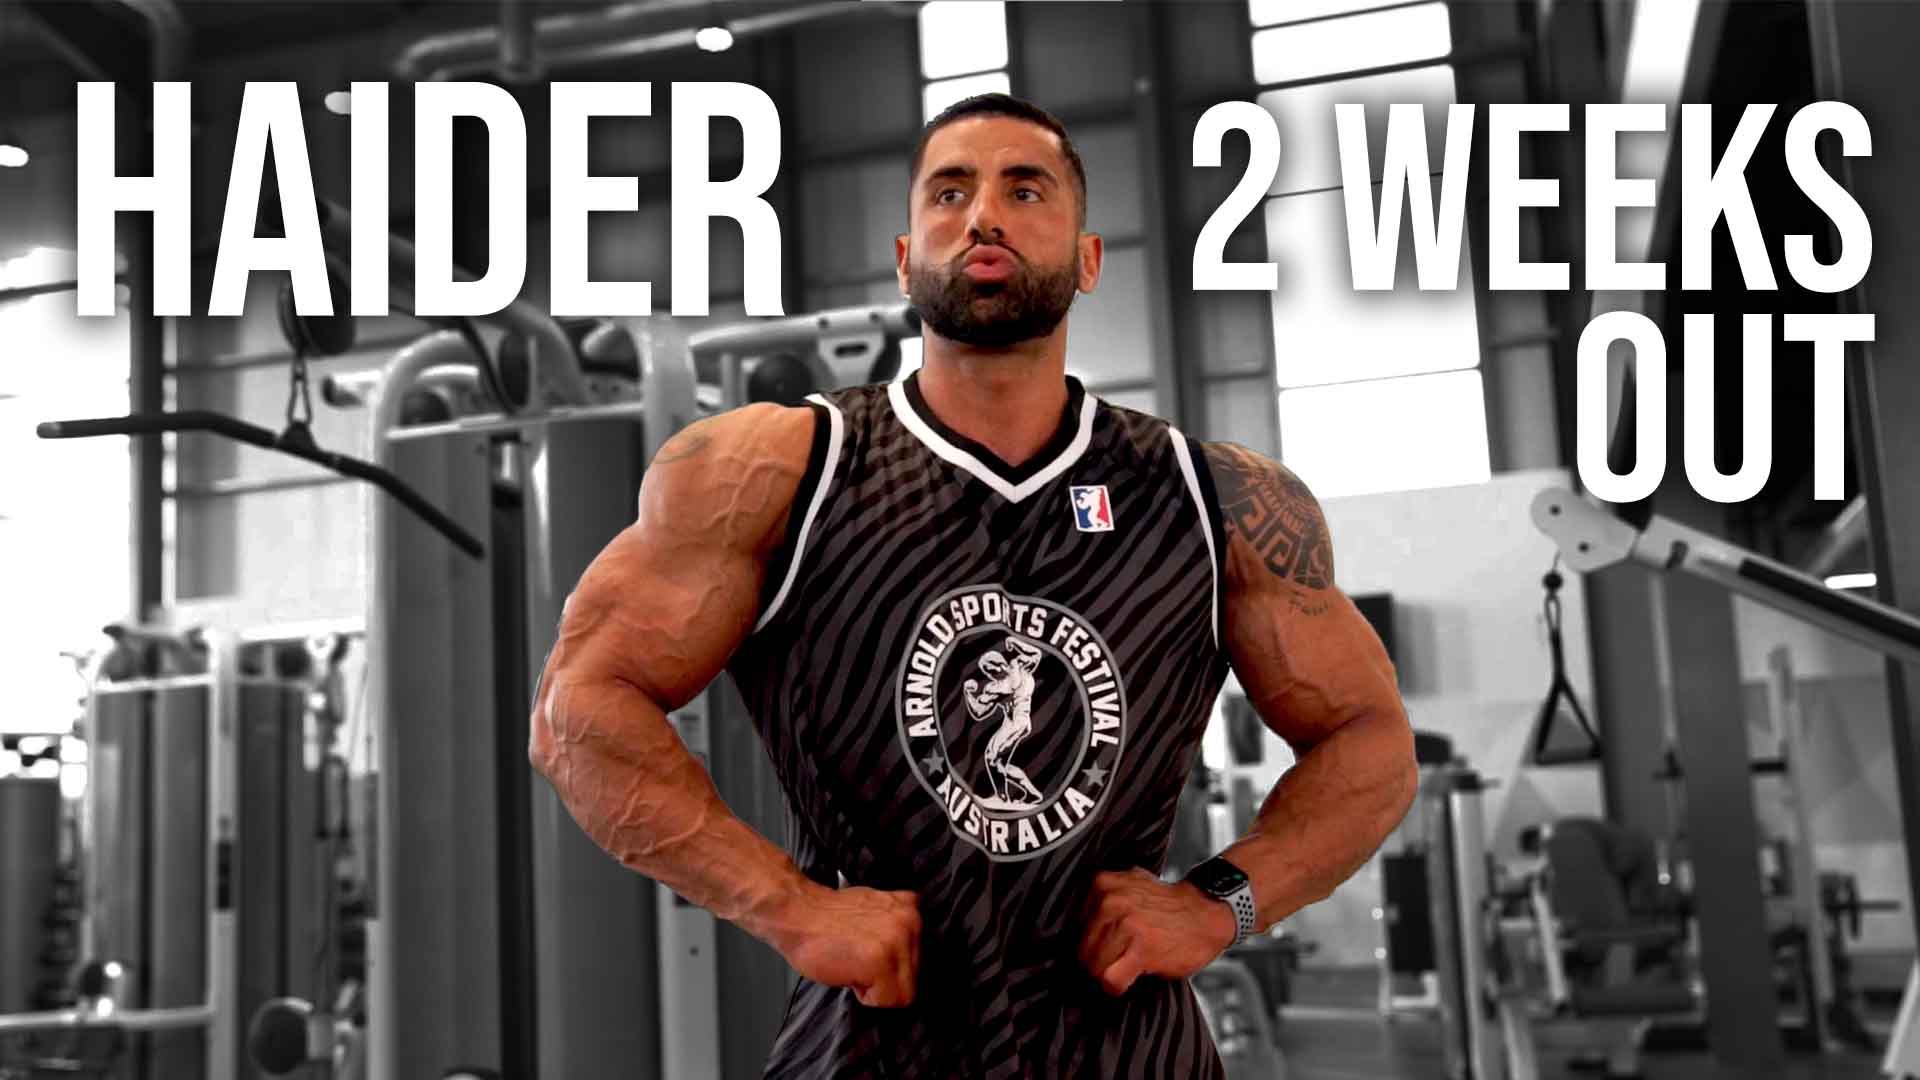 HAIDER - 2 WEEKS OUT